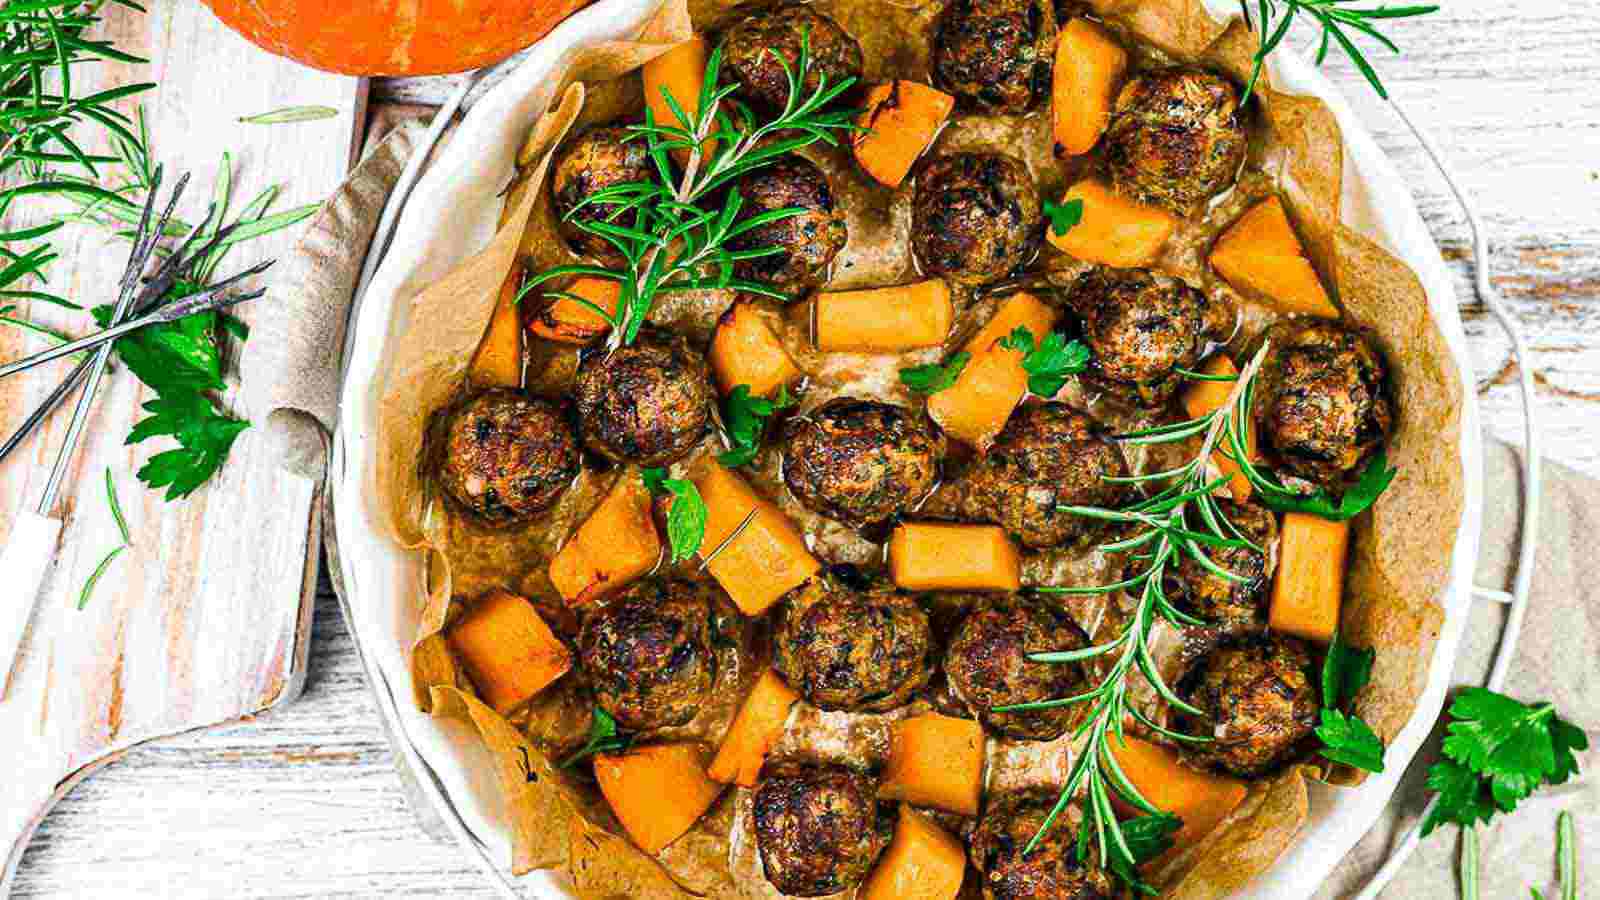 <p>Fall in love with the Pumpkin Spice Meatballs – a low-carb creation that’s perfect for seasonal snacking. These meatballs are a fusion of savory and spiced flavors, capturing the essence of fall in every bite. With a low-carb profile and a burst of taste, they’re a must-try for anyone seeking a low-carb finger food experience.</p><p><strong>Get the Recipe: </strong><a href="https://www.lowcarb-nocarb.com/keto-pumpkin-meatballs/?utm_source=msn&utm_medium=page&utm_campaign=msn">Pumpkin Low Carb Meatballs</a></p>